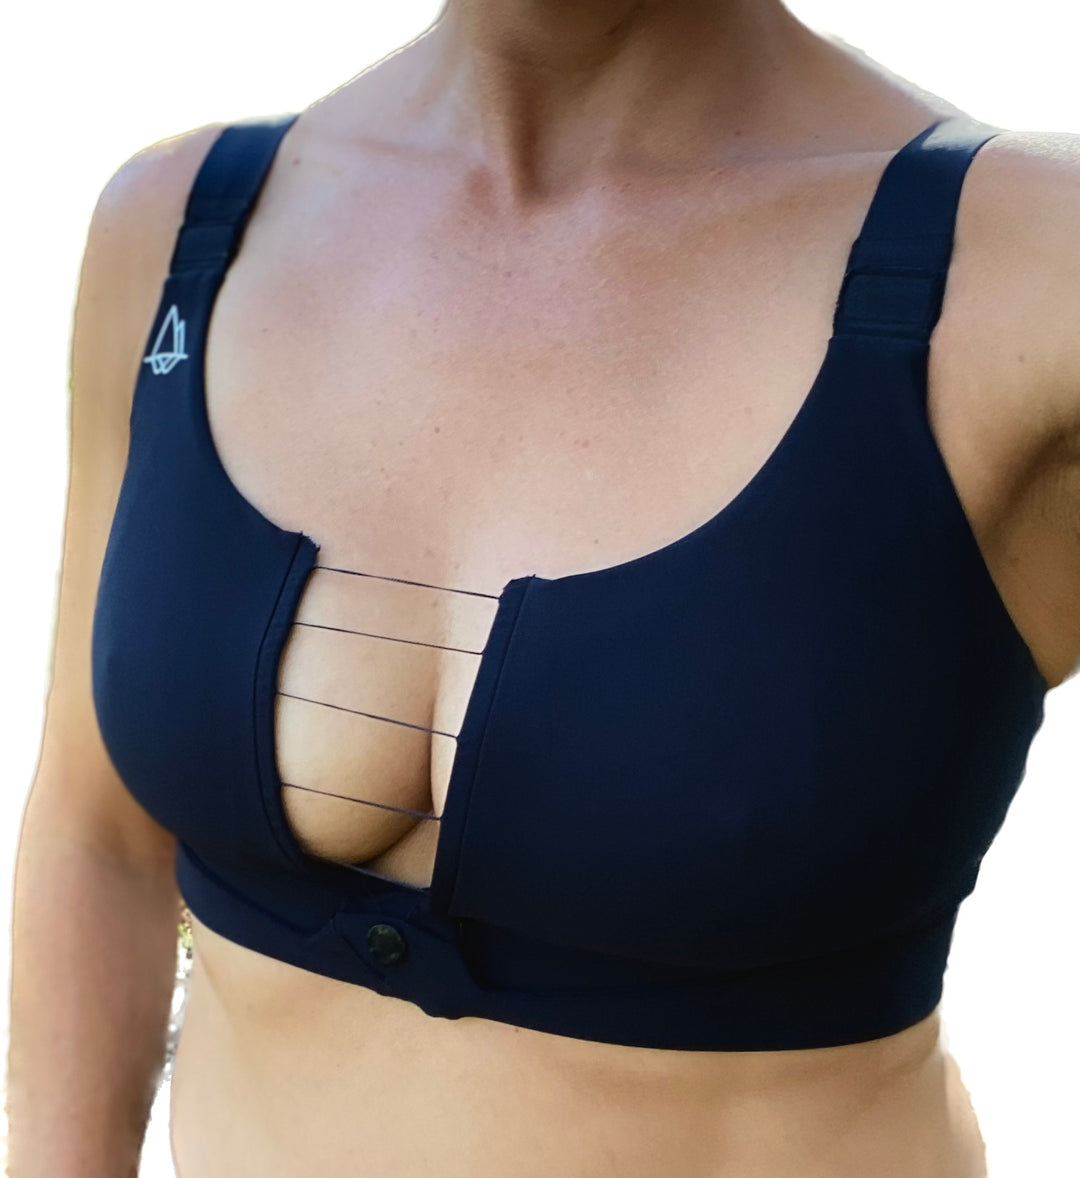 Your Fitness: Could You Use This High-Tech, Bounce-Free Sports Bra